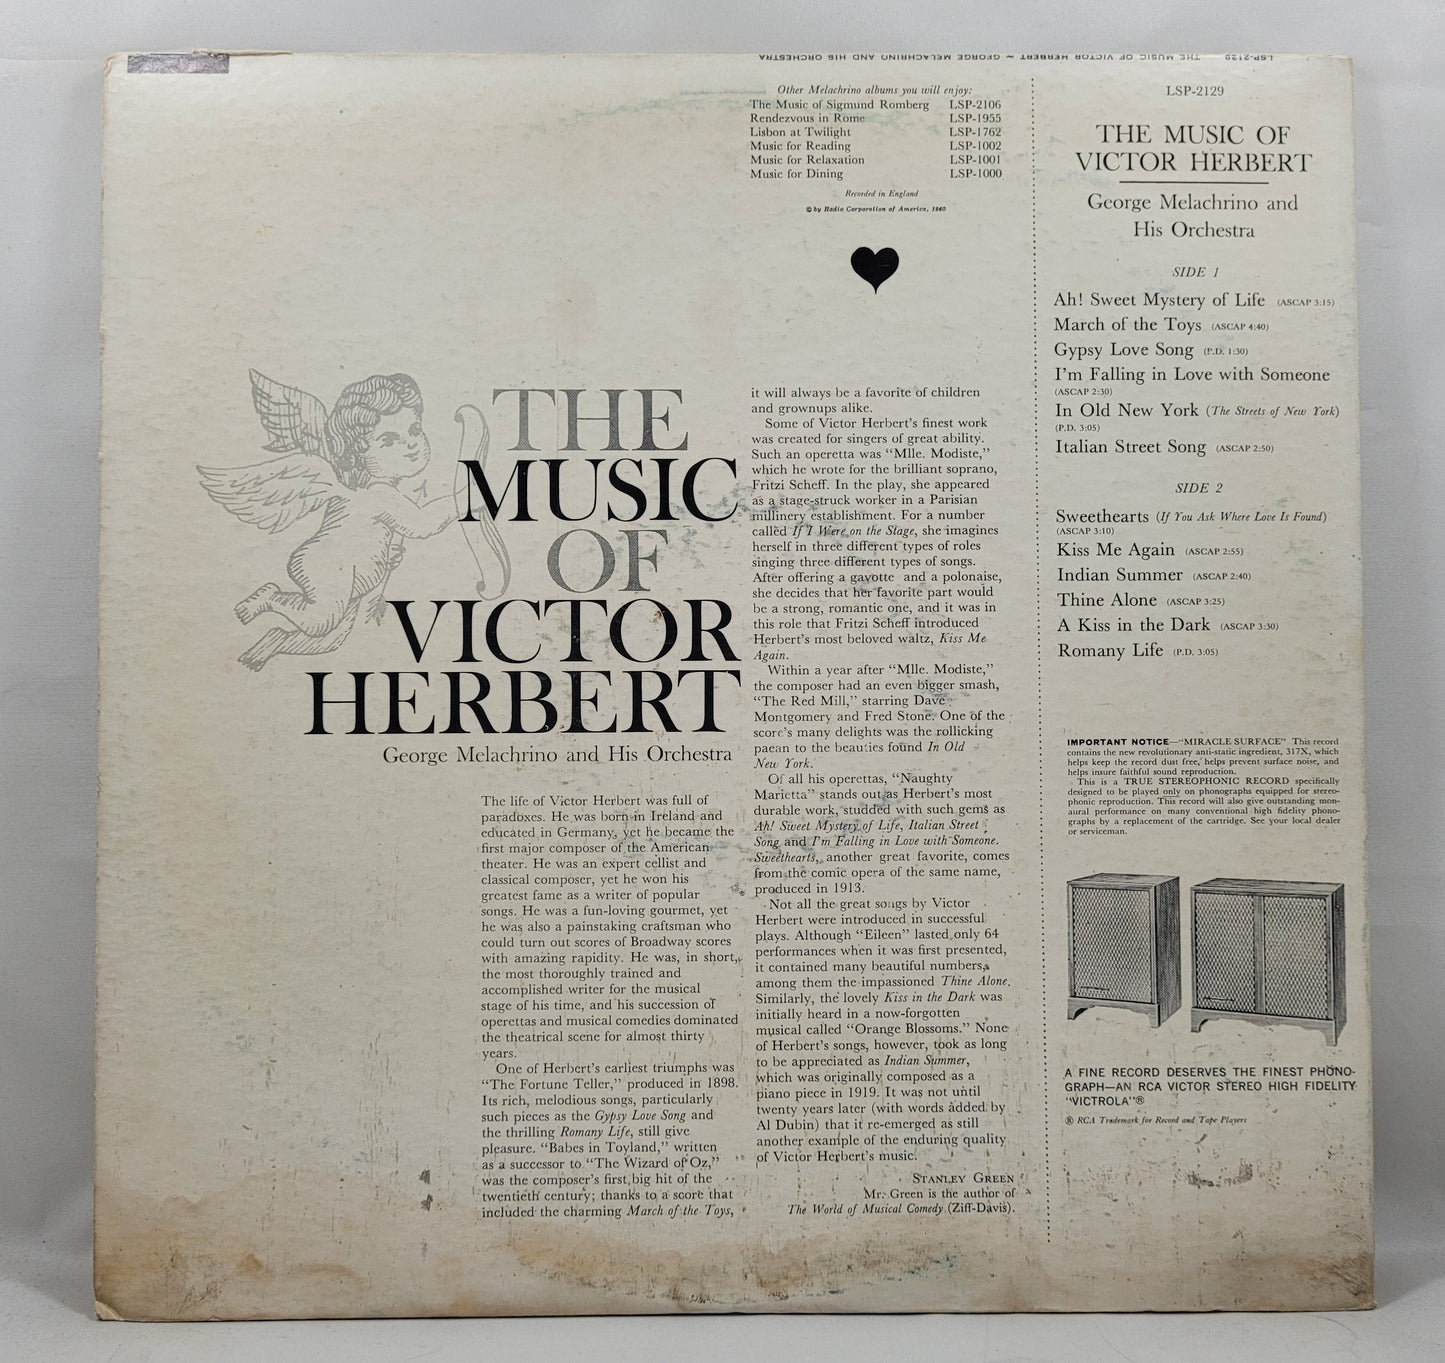 George Melachrino and His Orchestra - The Music of Victor Herbert [1960 Used Vinyl Record LP]